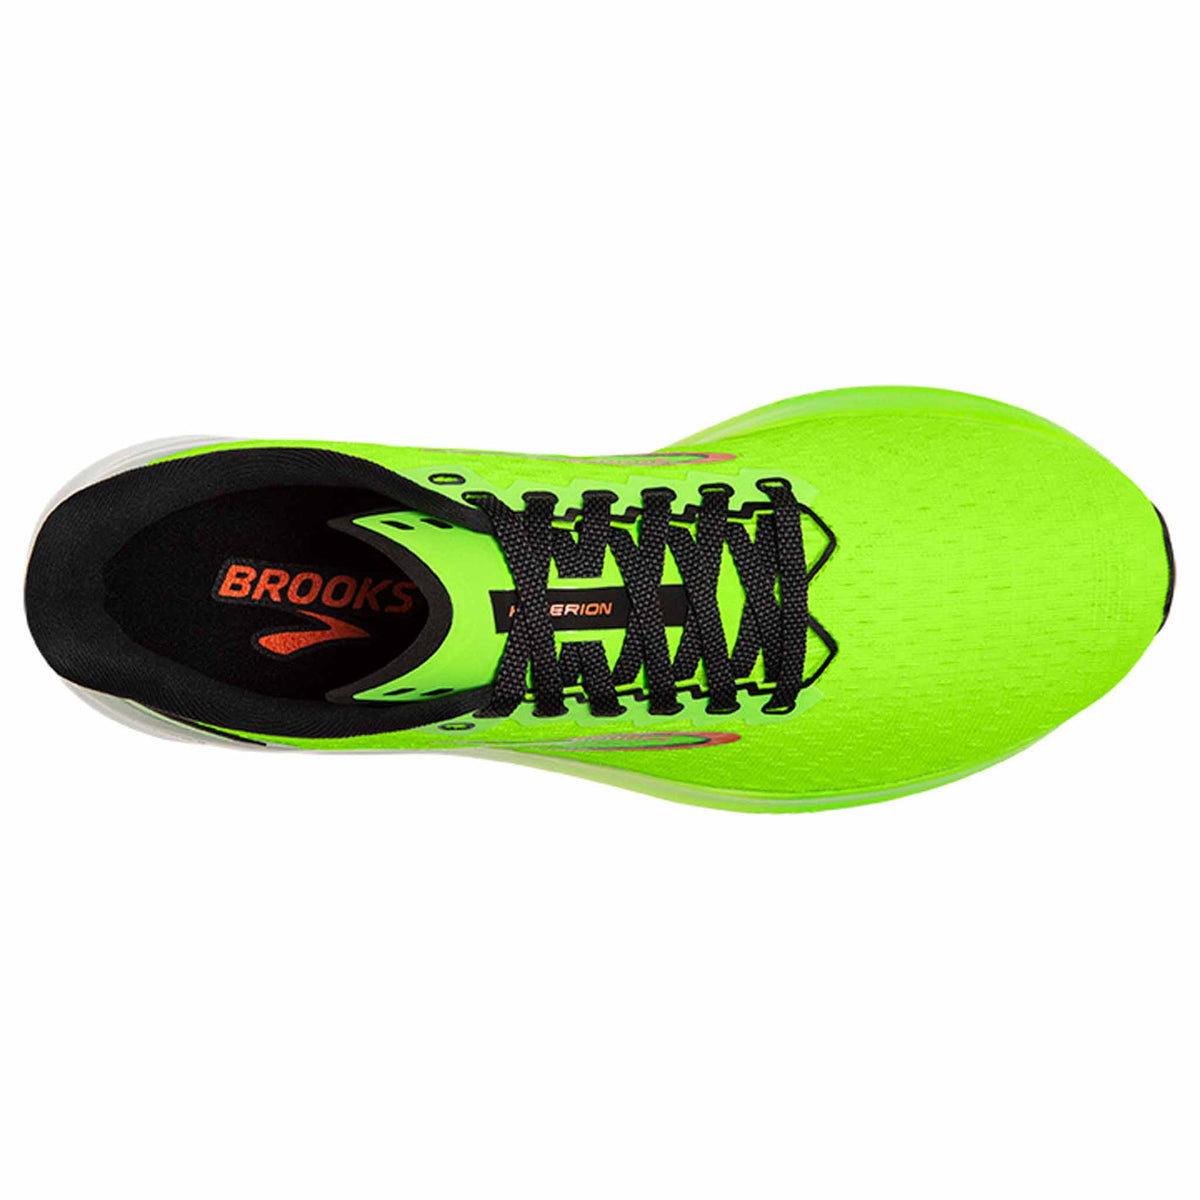 Brooks Hyperion chaussures de course à pied homme - Green Gecko / Red Orange / White